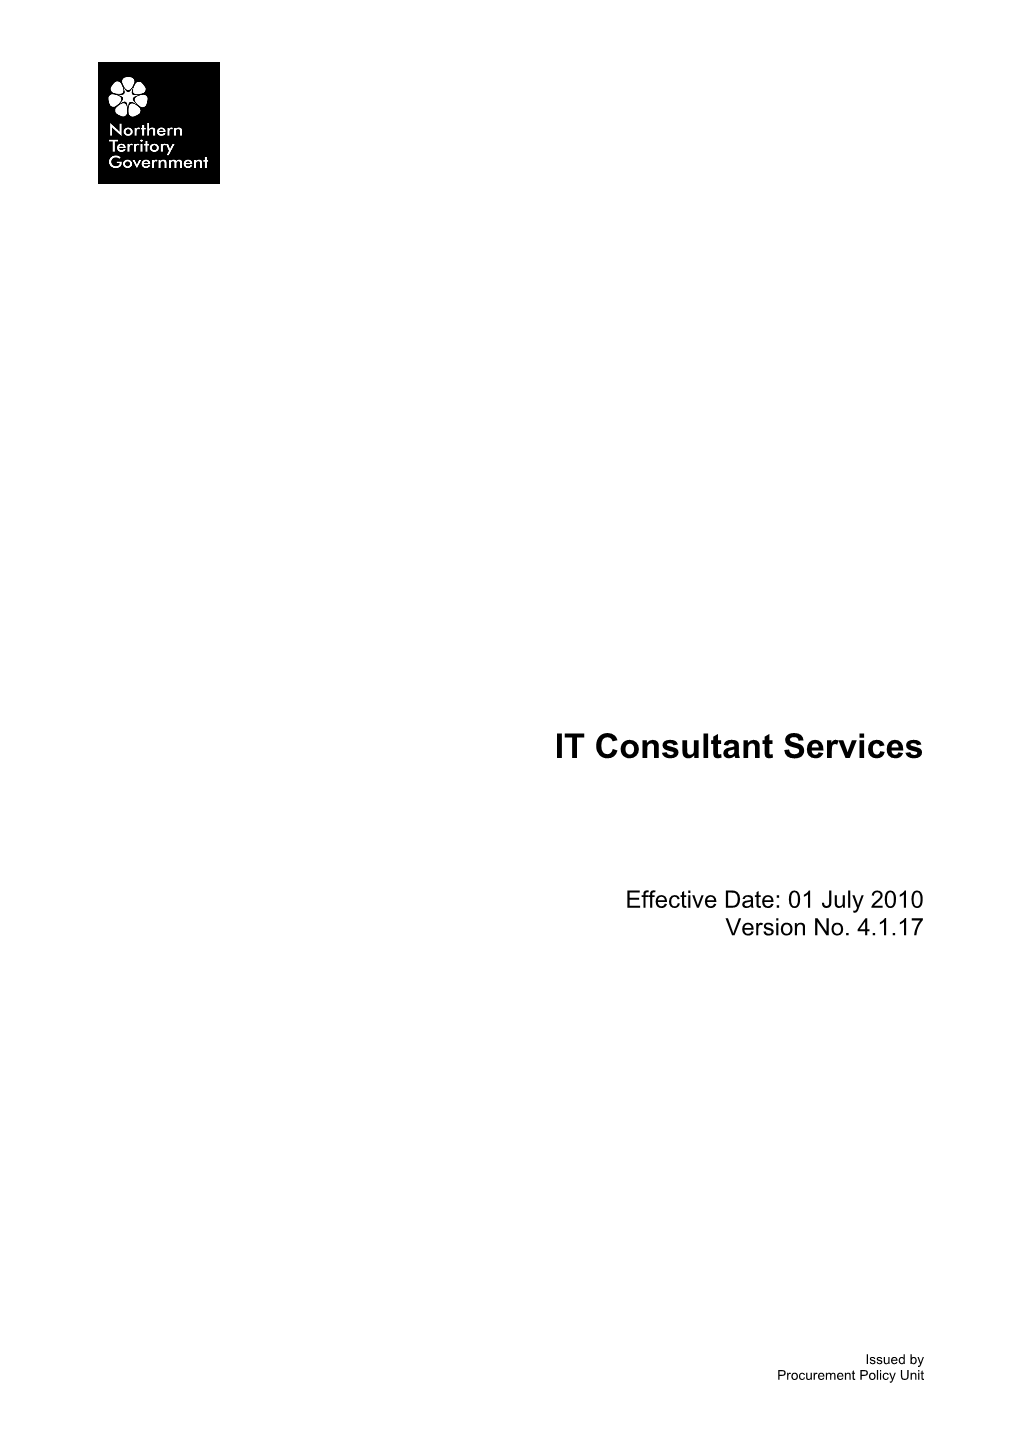 IT Consultant Services - V 4.1.17 (01 July 2010)